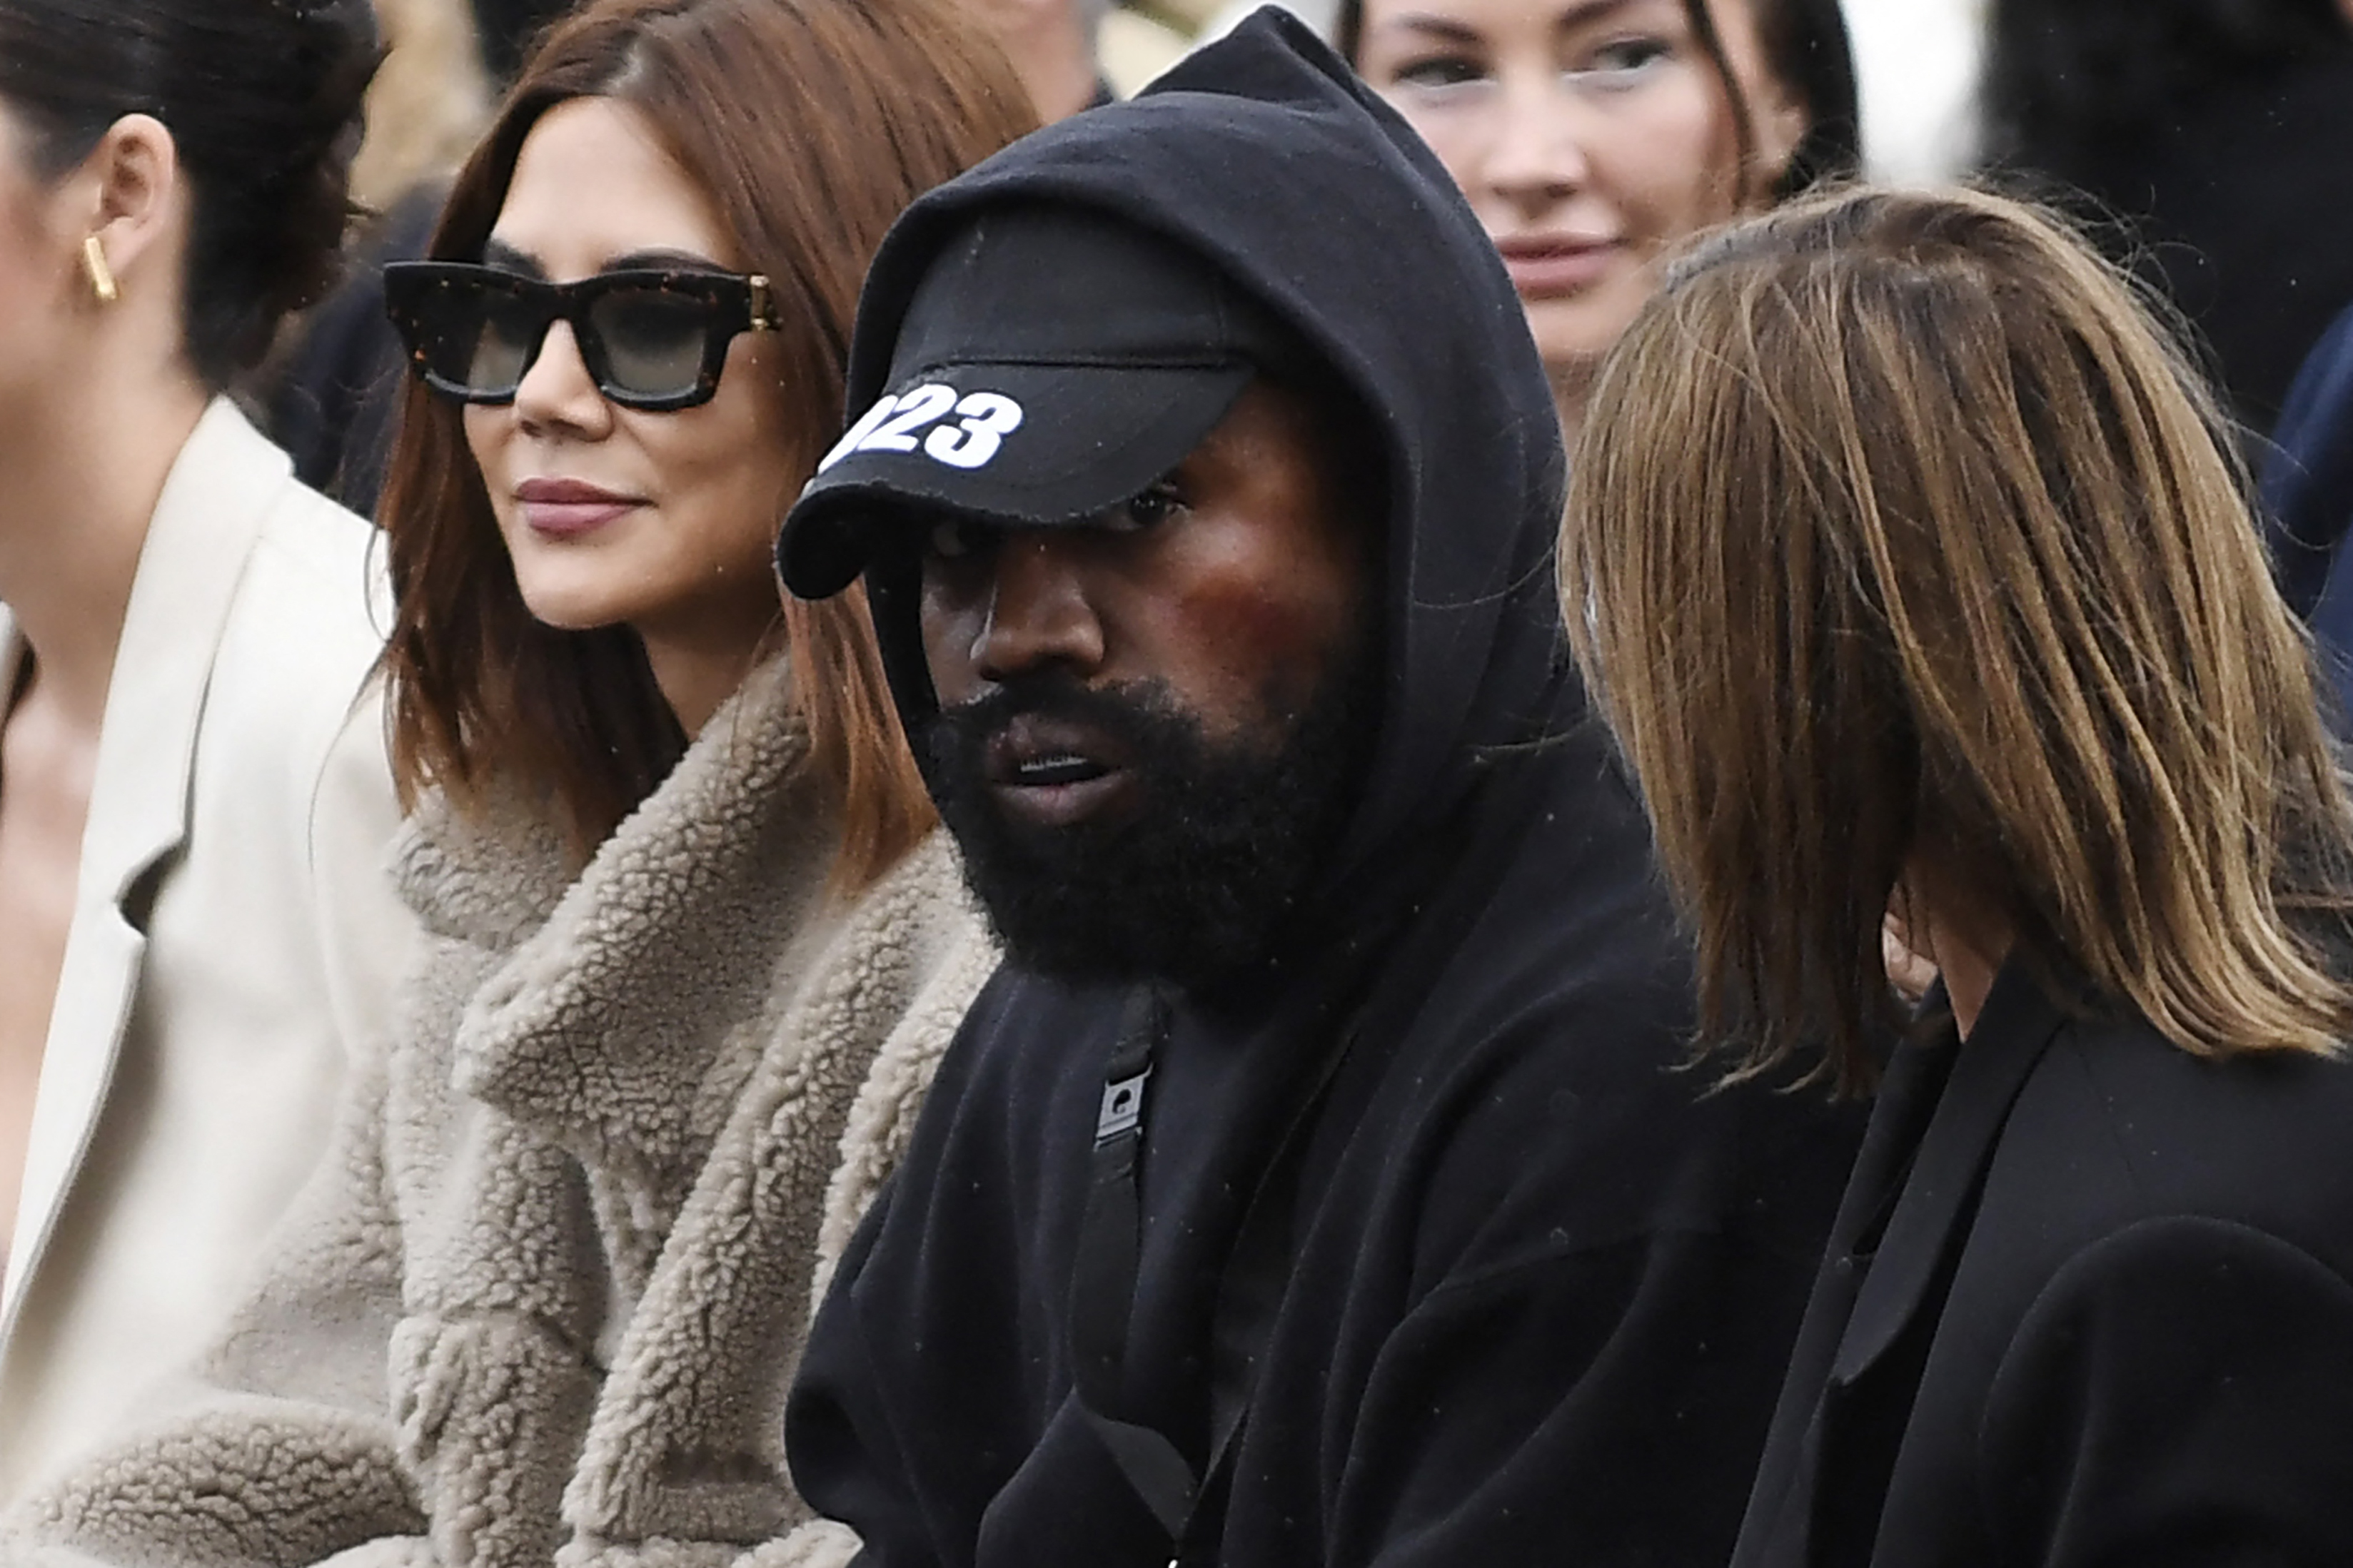 Kanye West Says He’s Lost $2 Billion Getting Canceled Over Controversial Remarks